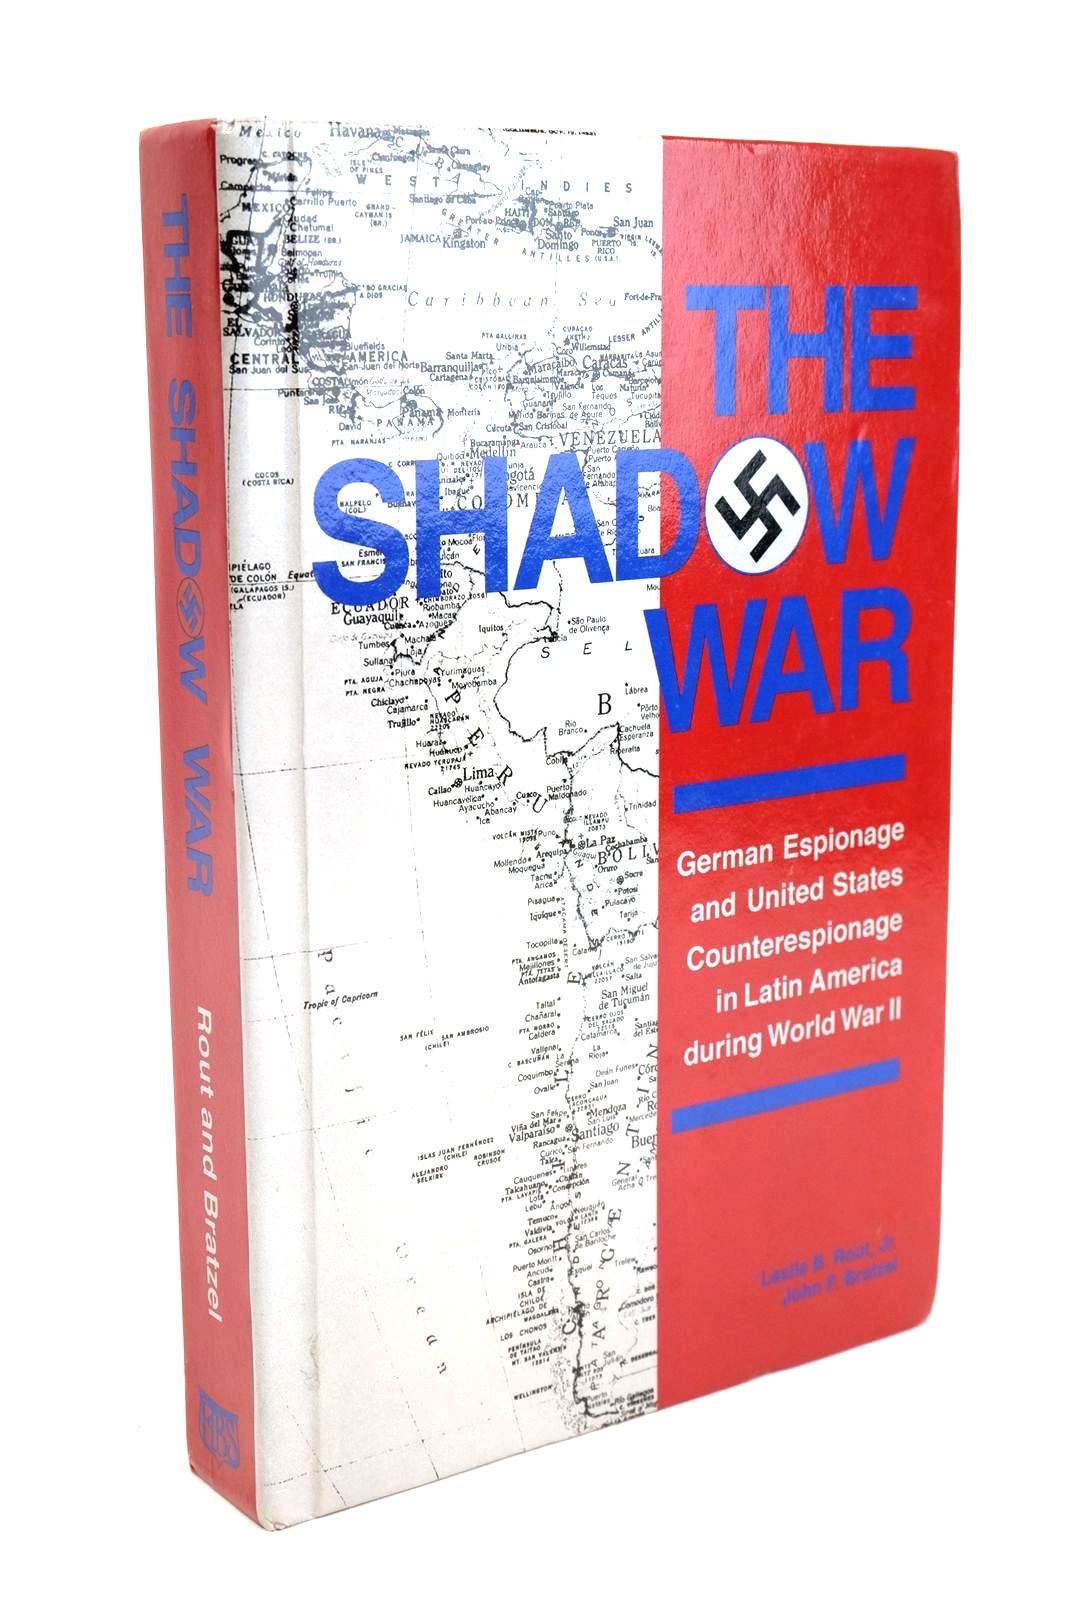 Photo of THE SHADOW WAR written by Rout, Leslie B. Bratzel, John F. published by University Publications of America (STOCK CODE: 1327390)  for sale by Stella & Rose's Books